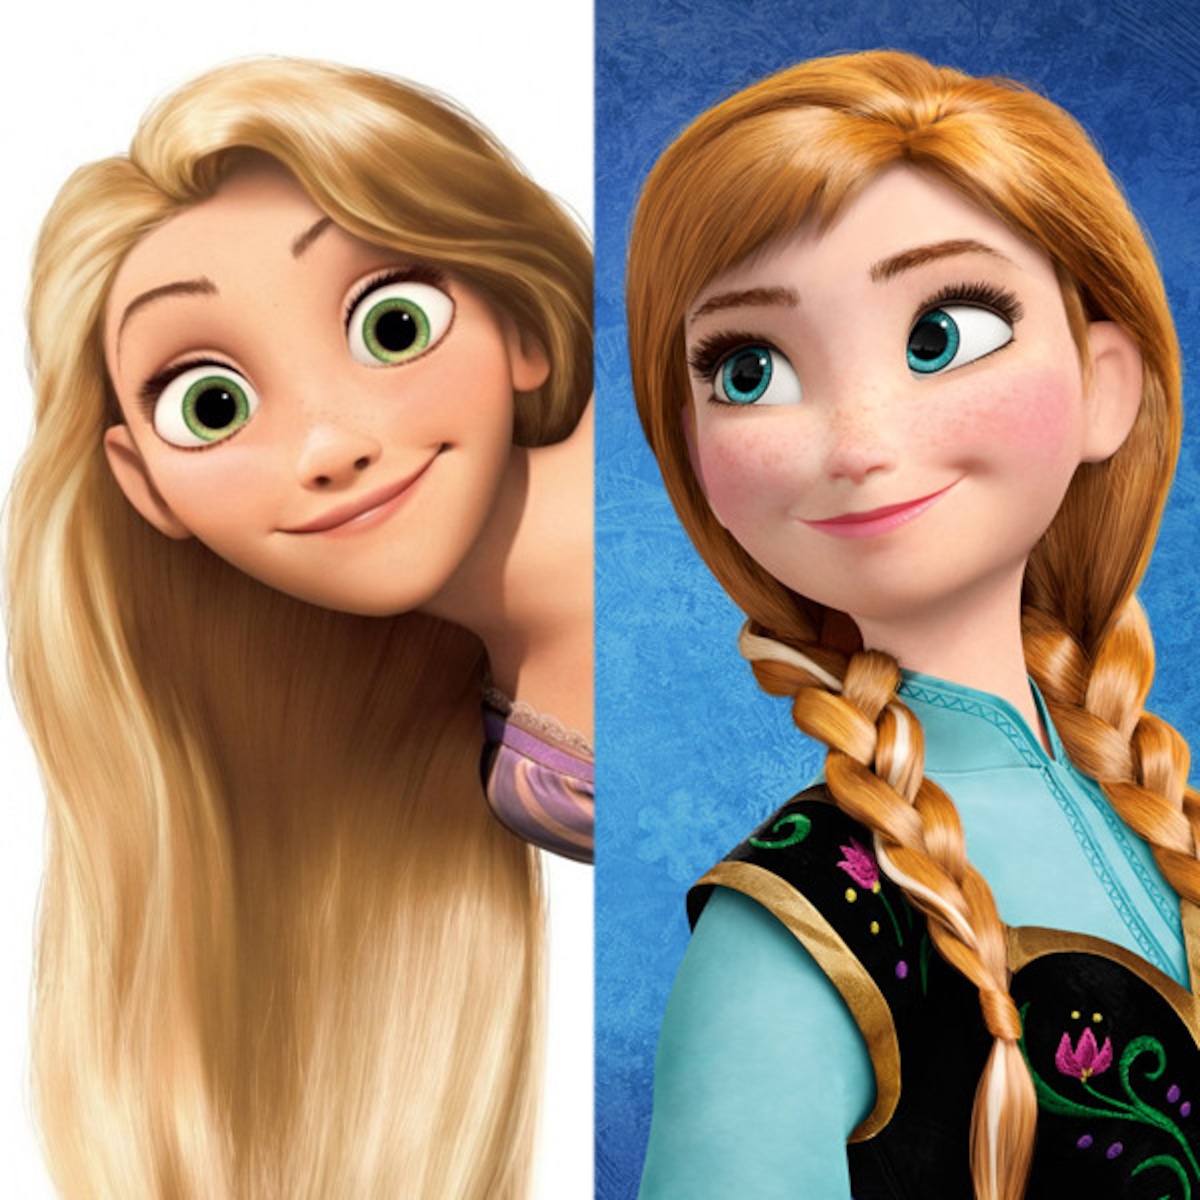 You Have to Read This Fan Theory About Frozen - E! Online